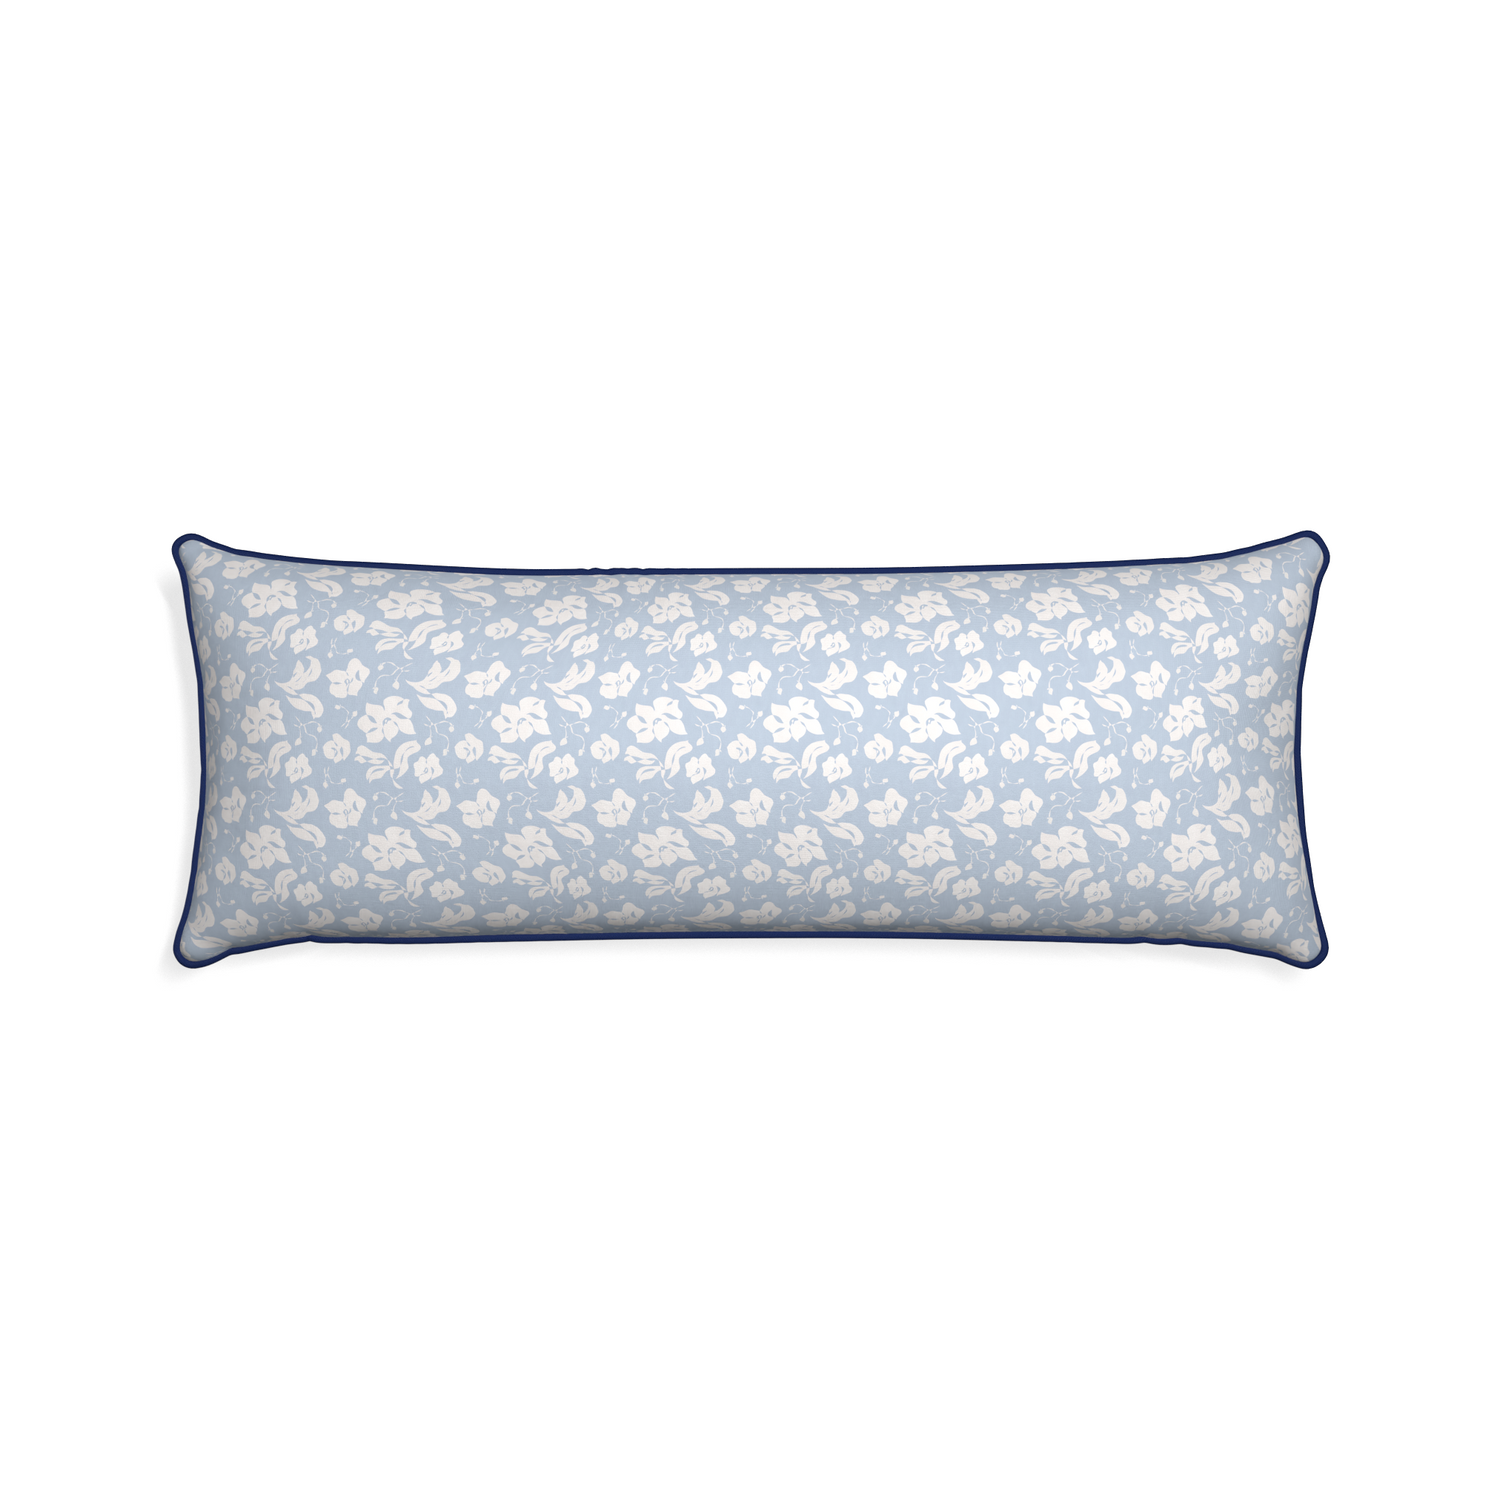 Xl-lumbar georgia custom pillow with midnight piping on white background